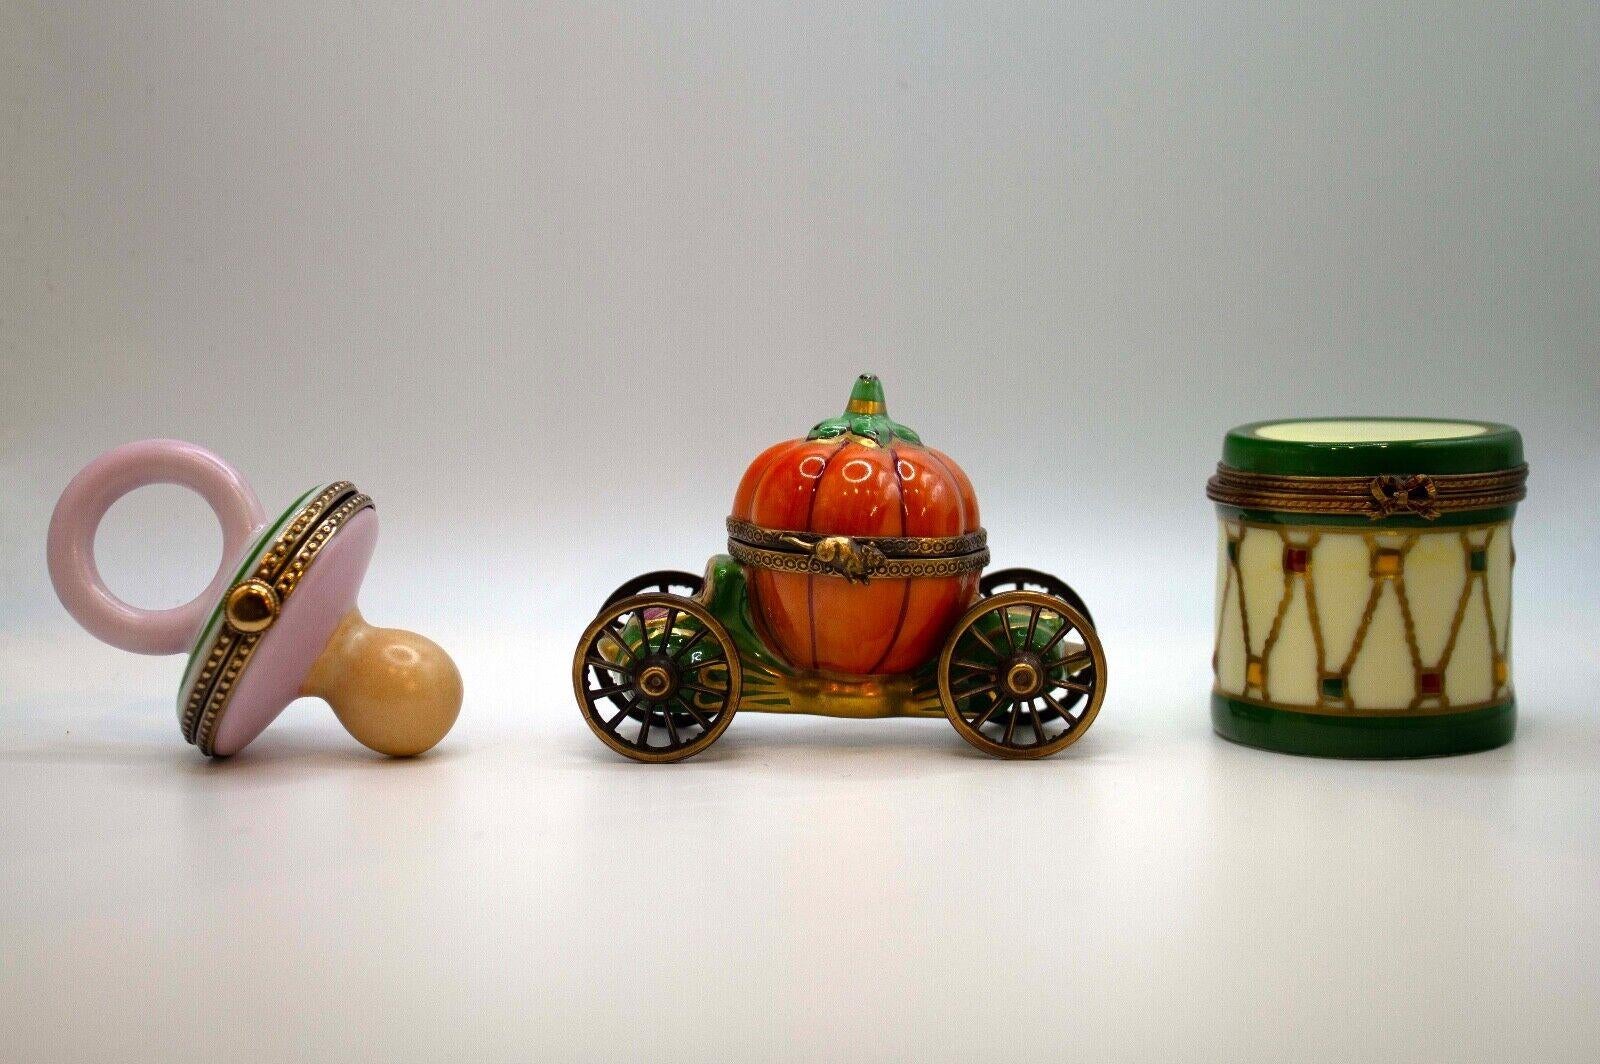 An adorable set of miniature porcelain collectable boxes by Limoges - featuring a pacifier with rabbit design, Cinderella's pumpkin carriage, and a green drum. Each one is artfully hand-painted with exquisite detailing and brilliant colors. The box